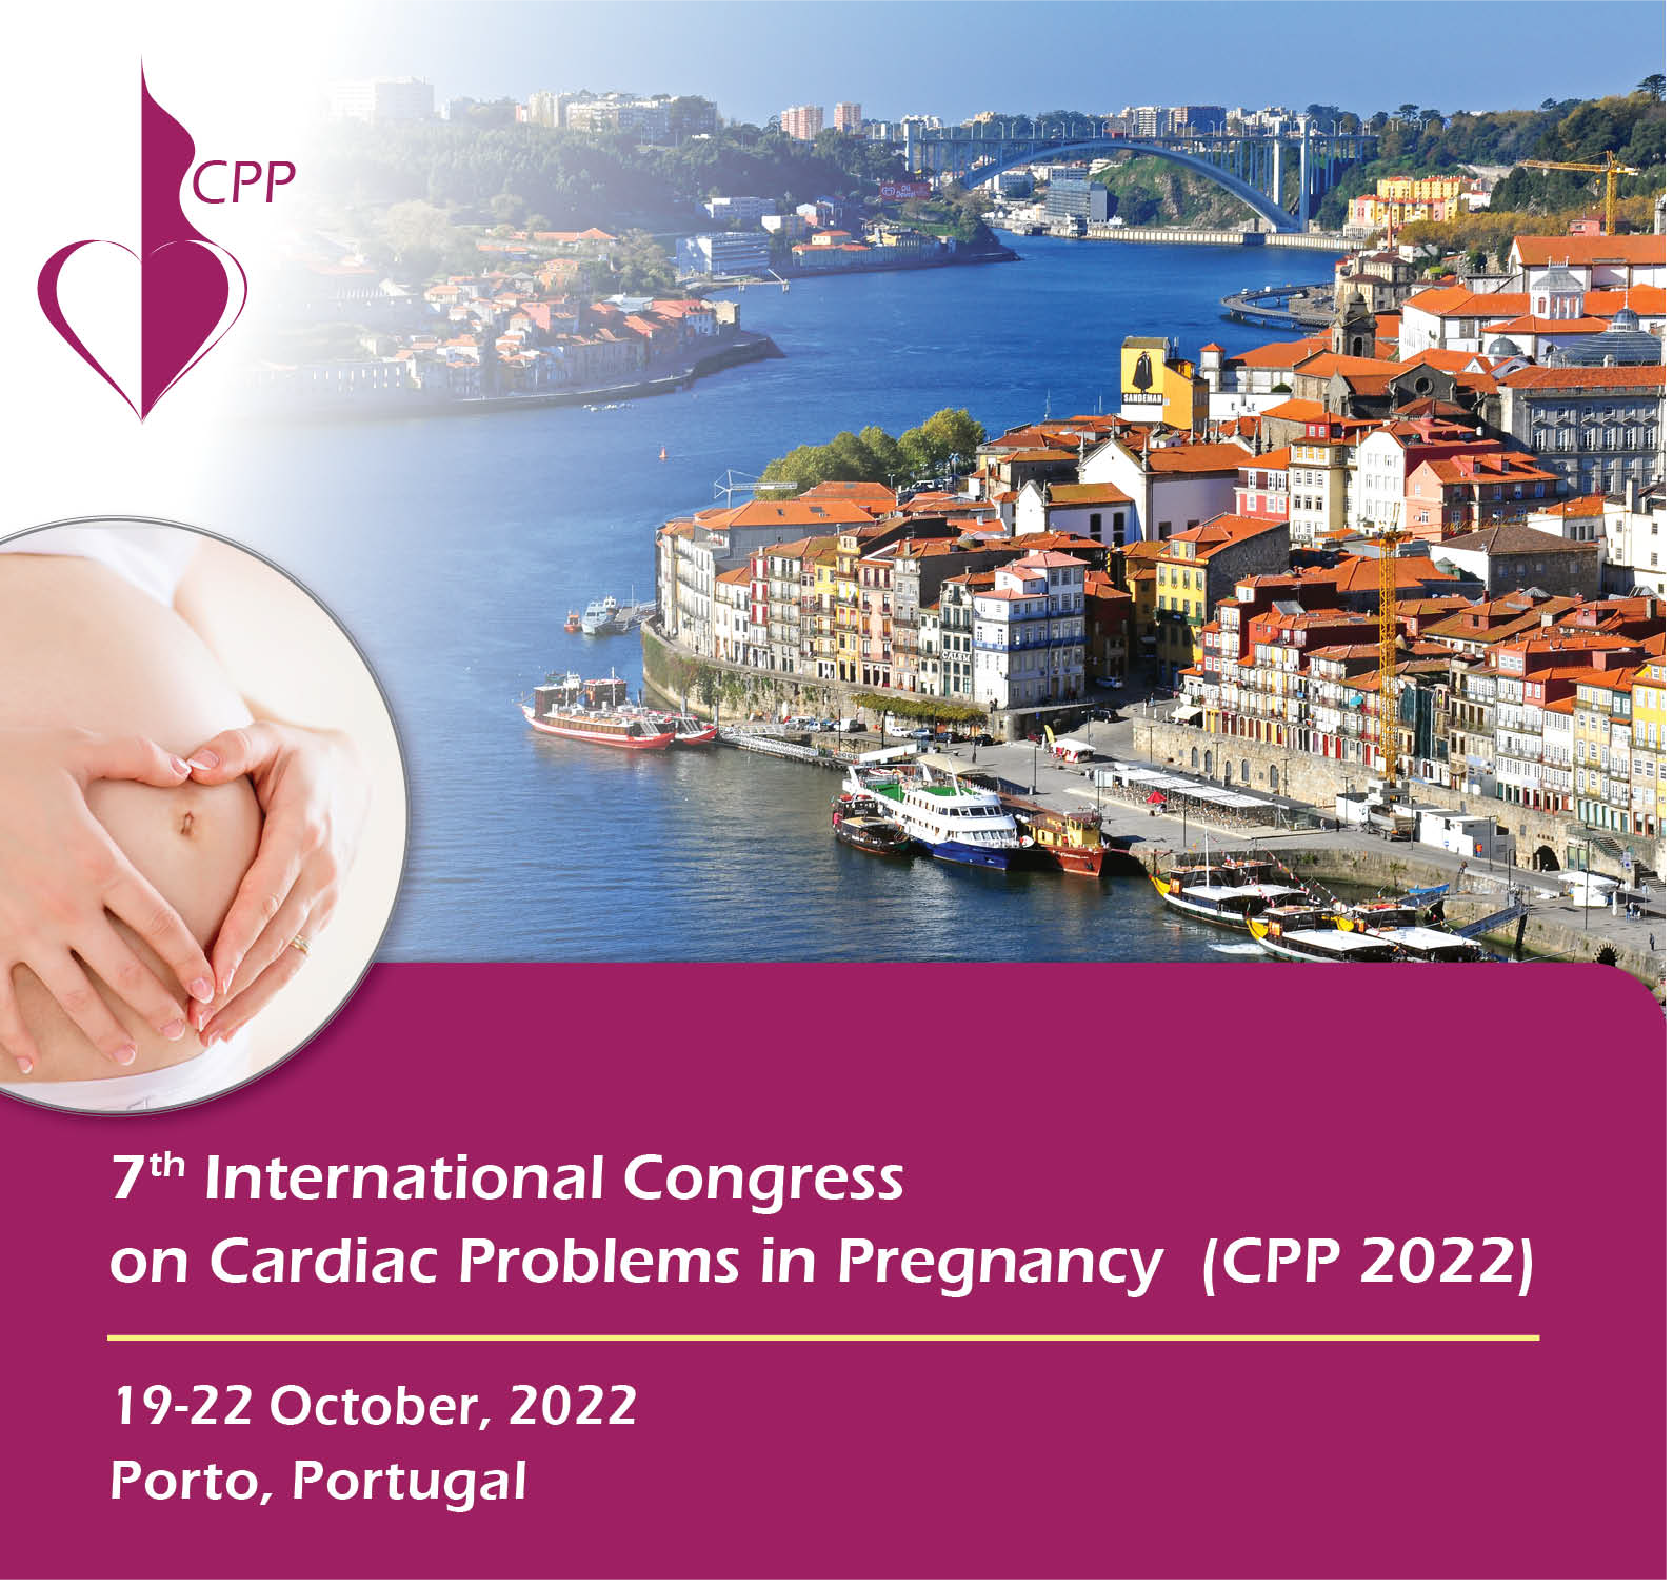 The 7th International Congress on Cardiac Problems in Pregnancy (CPP) 2022